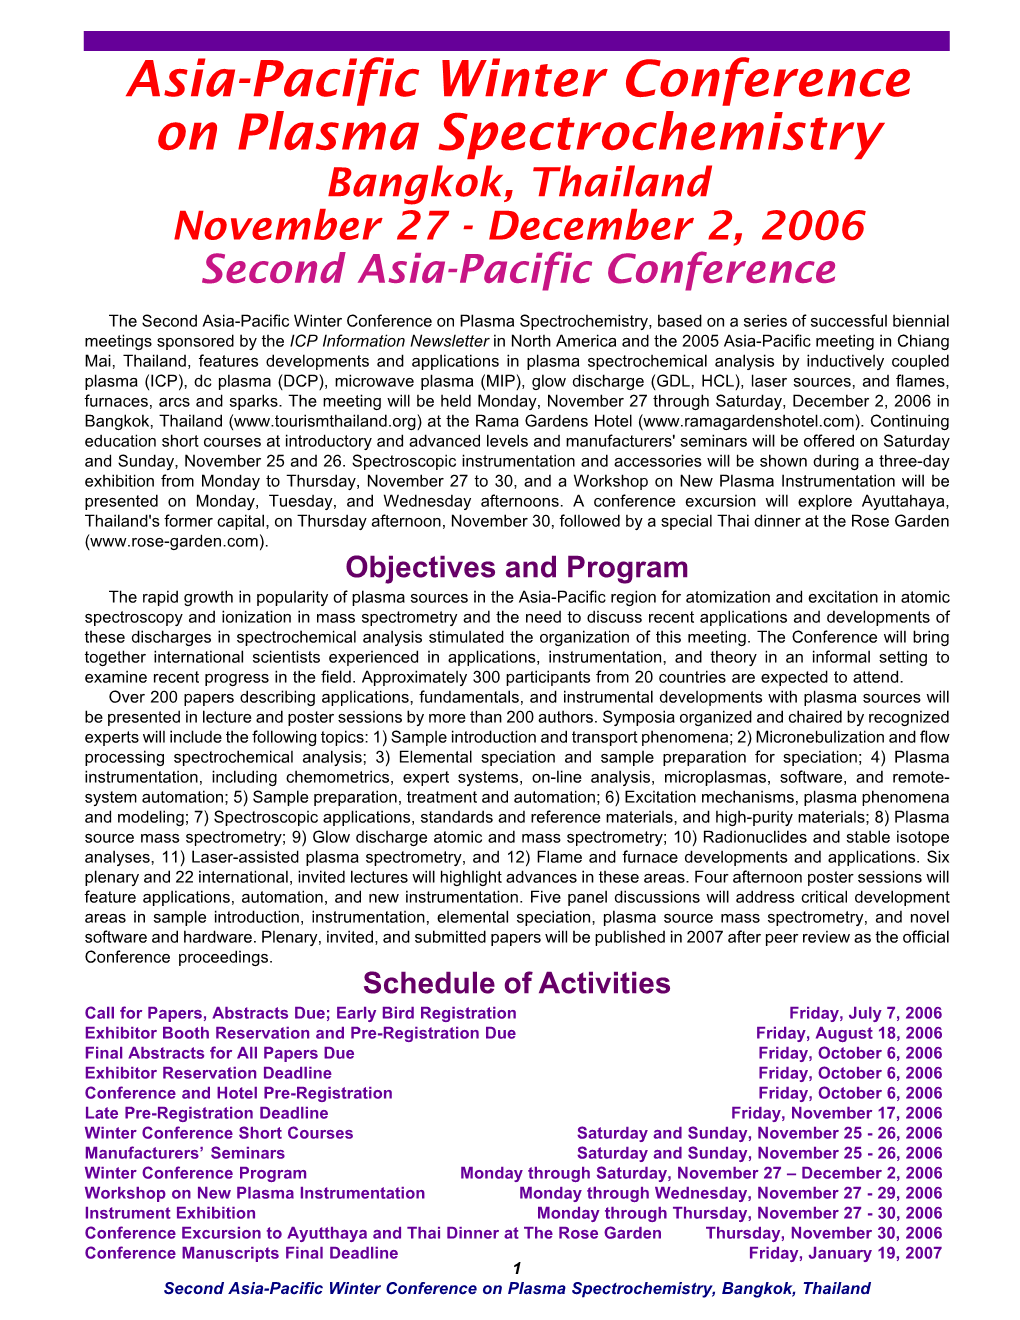 Asia-Pacific Winter Conference on Plasma Spectrochemistry Bangkok, Thailand November 27 - December 2, 2006 Second Asia-Pacific Conference